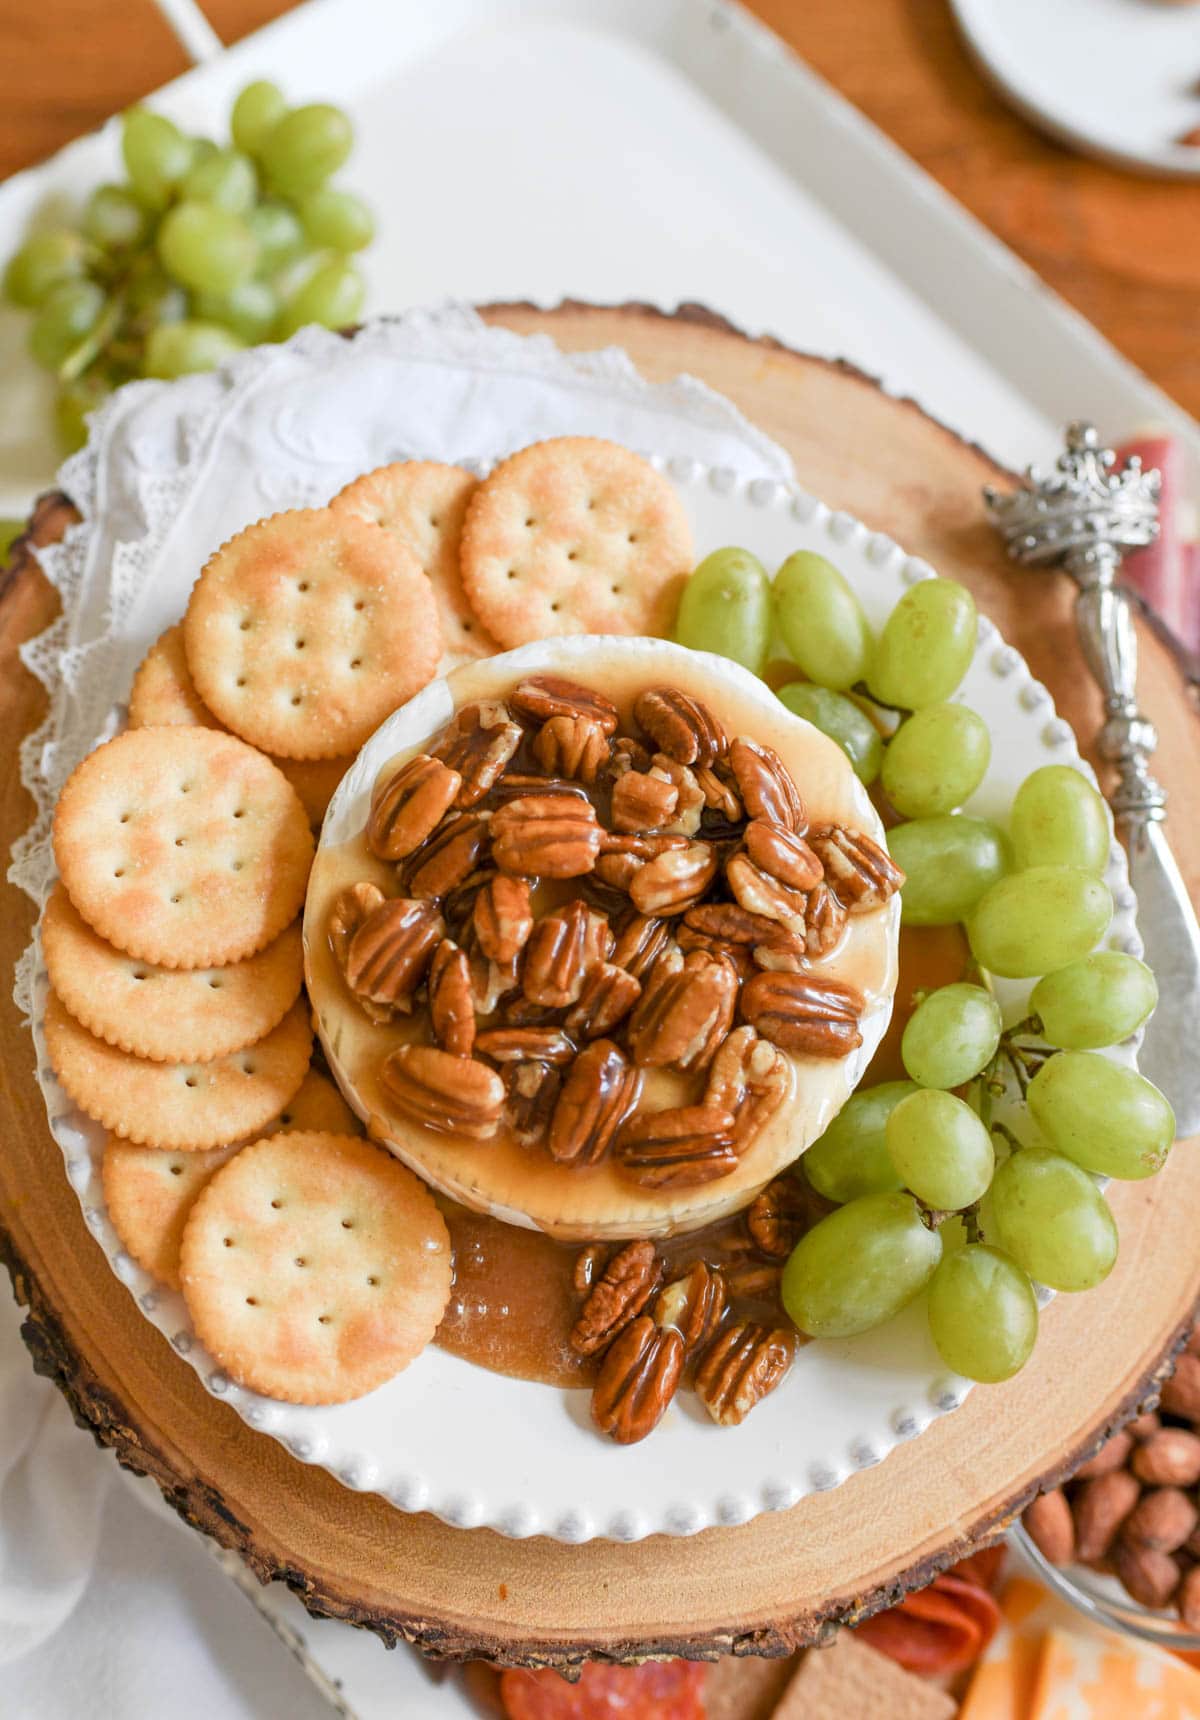 Baked Brie with Praline Sauce (With Video)